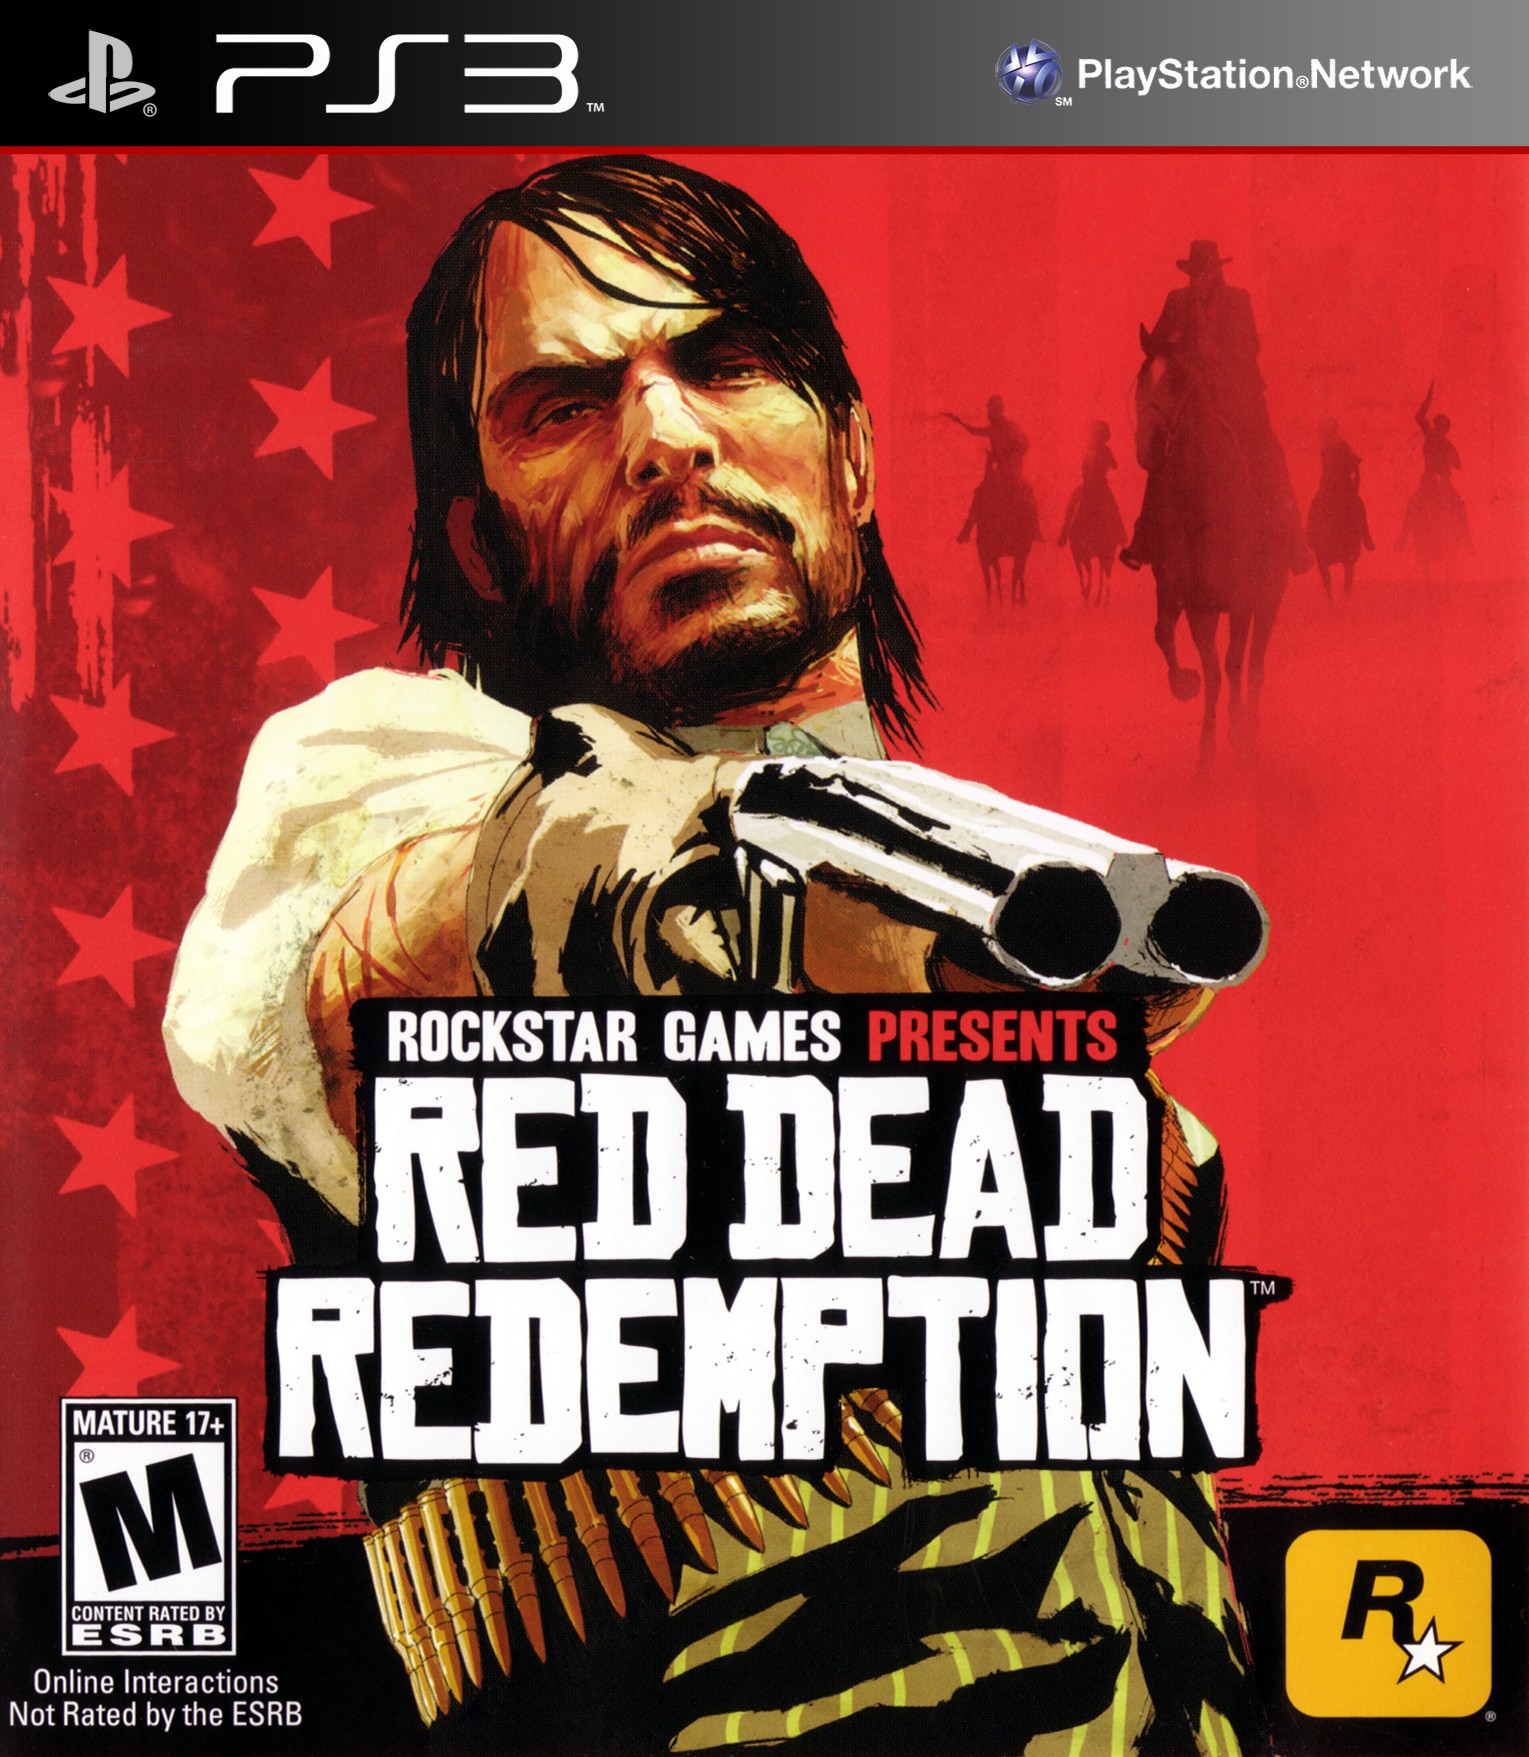 'Red Dead Redemption'